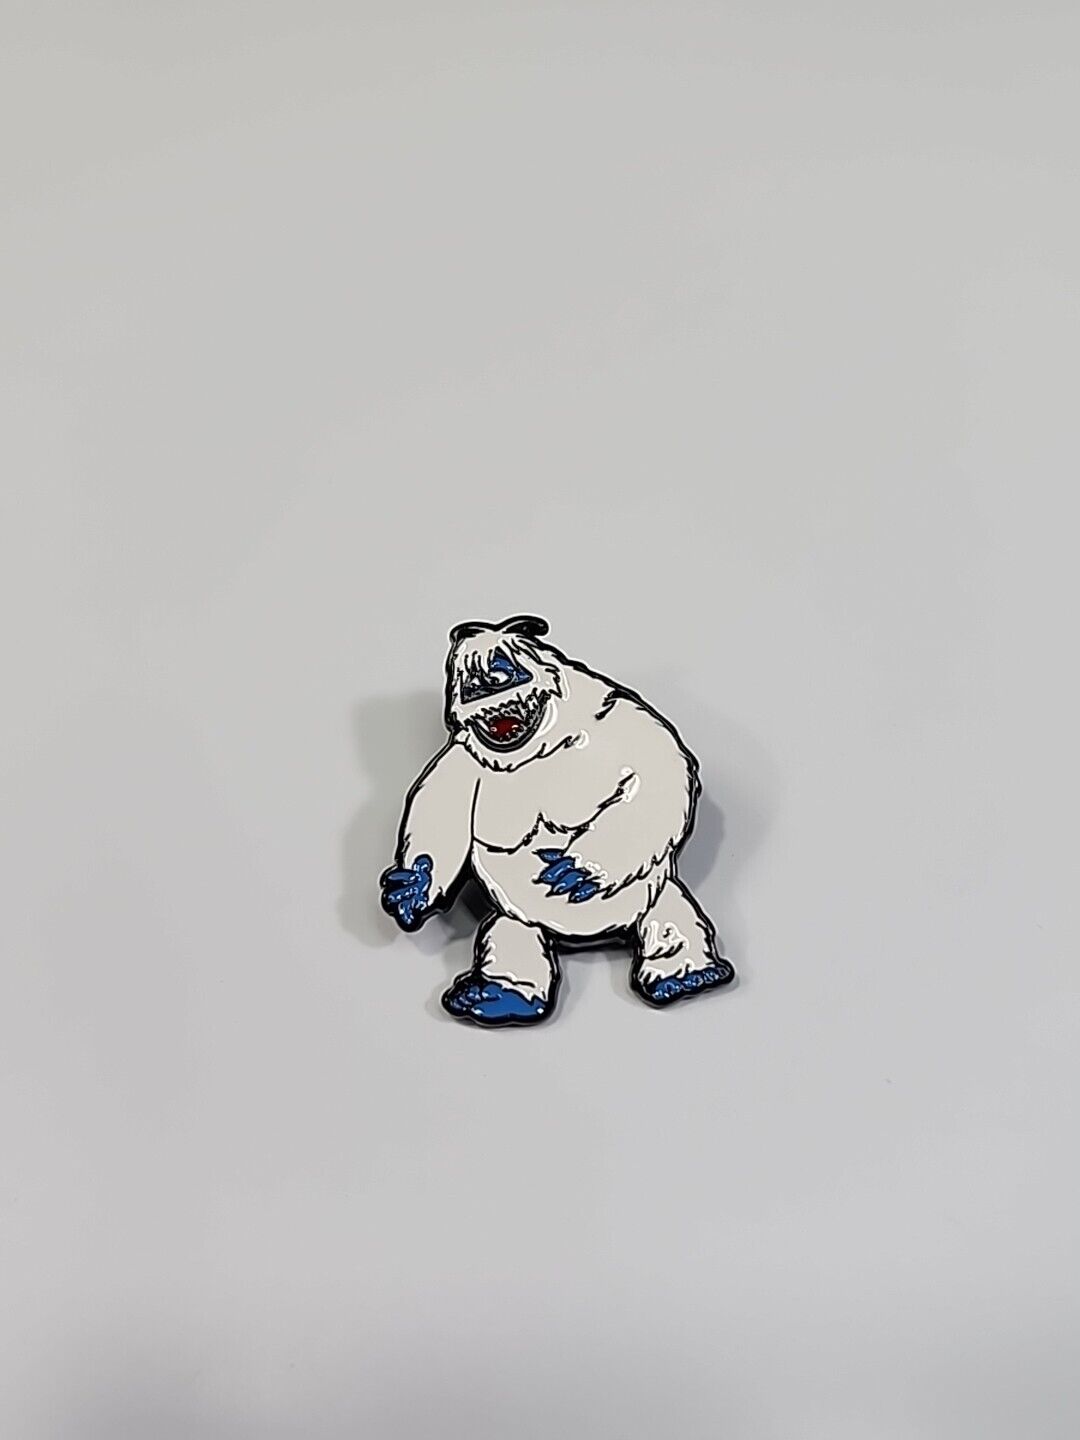 Bumble The Abominable Snowmonster of the North Pin Rudolph Red Nosed Reindeer